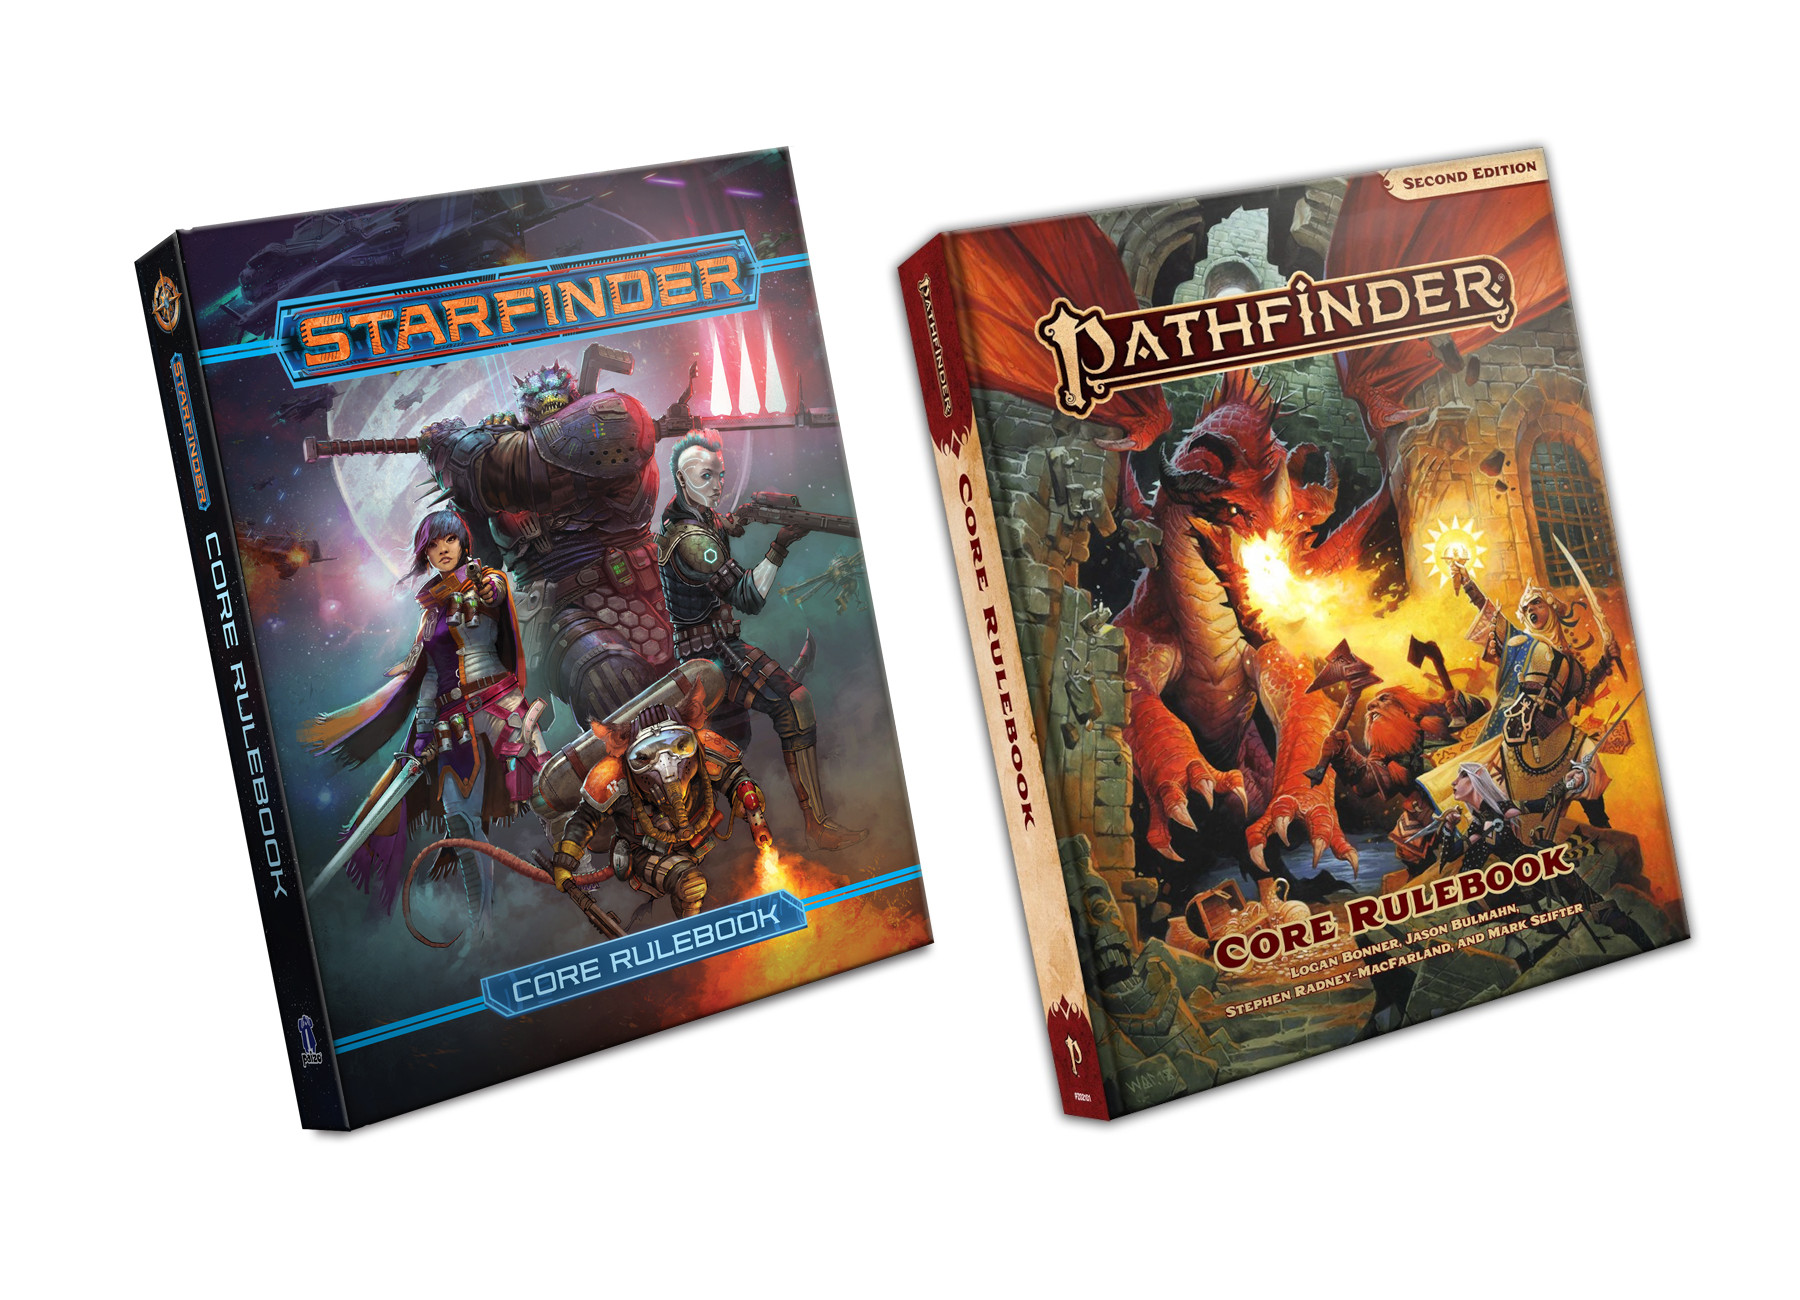 [$ 12.58] Pathfinder Second Edition Core Rulebook and Starfinder Core Rulebook Digital CD Key